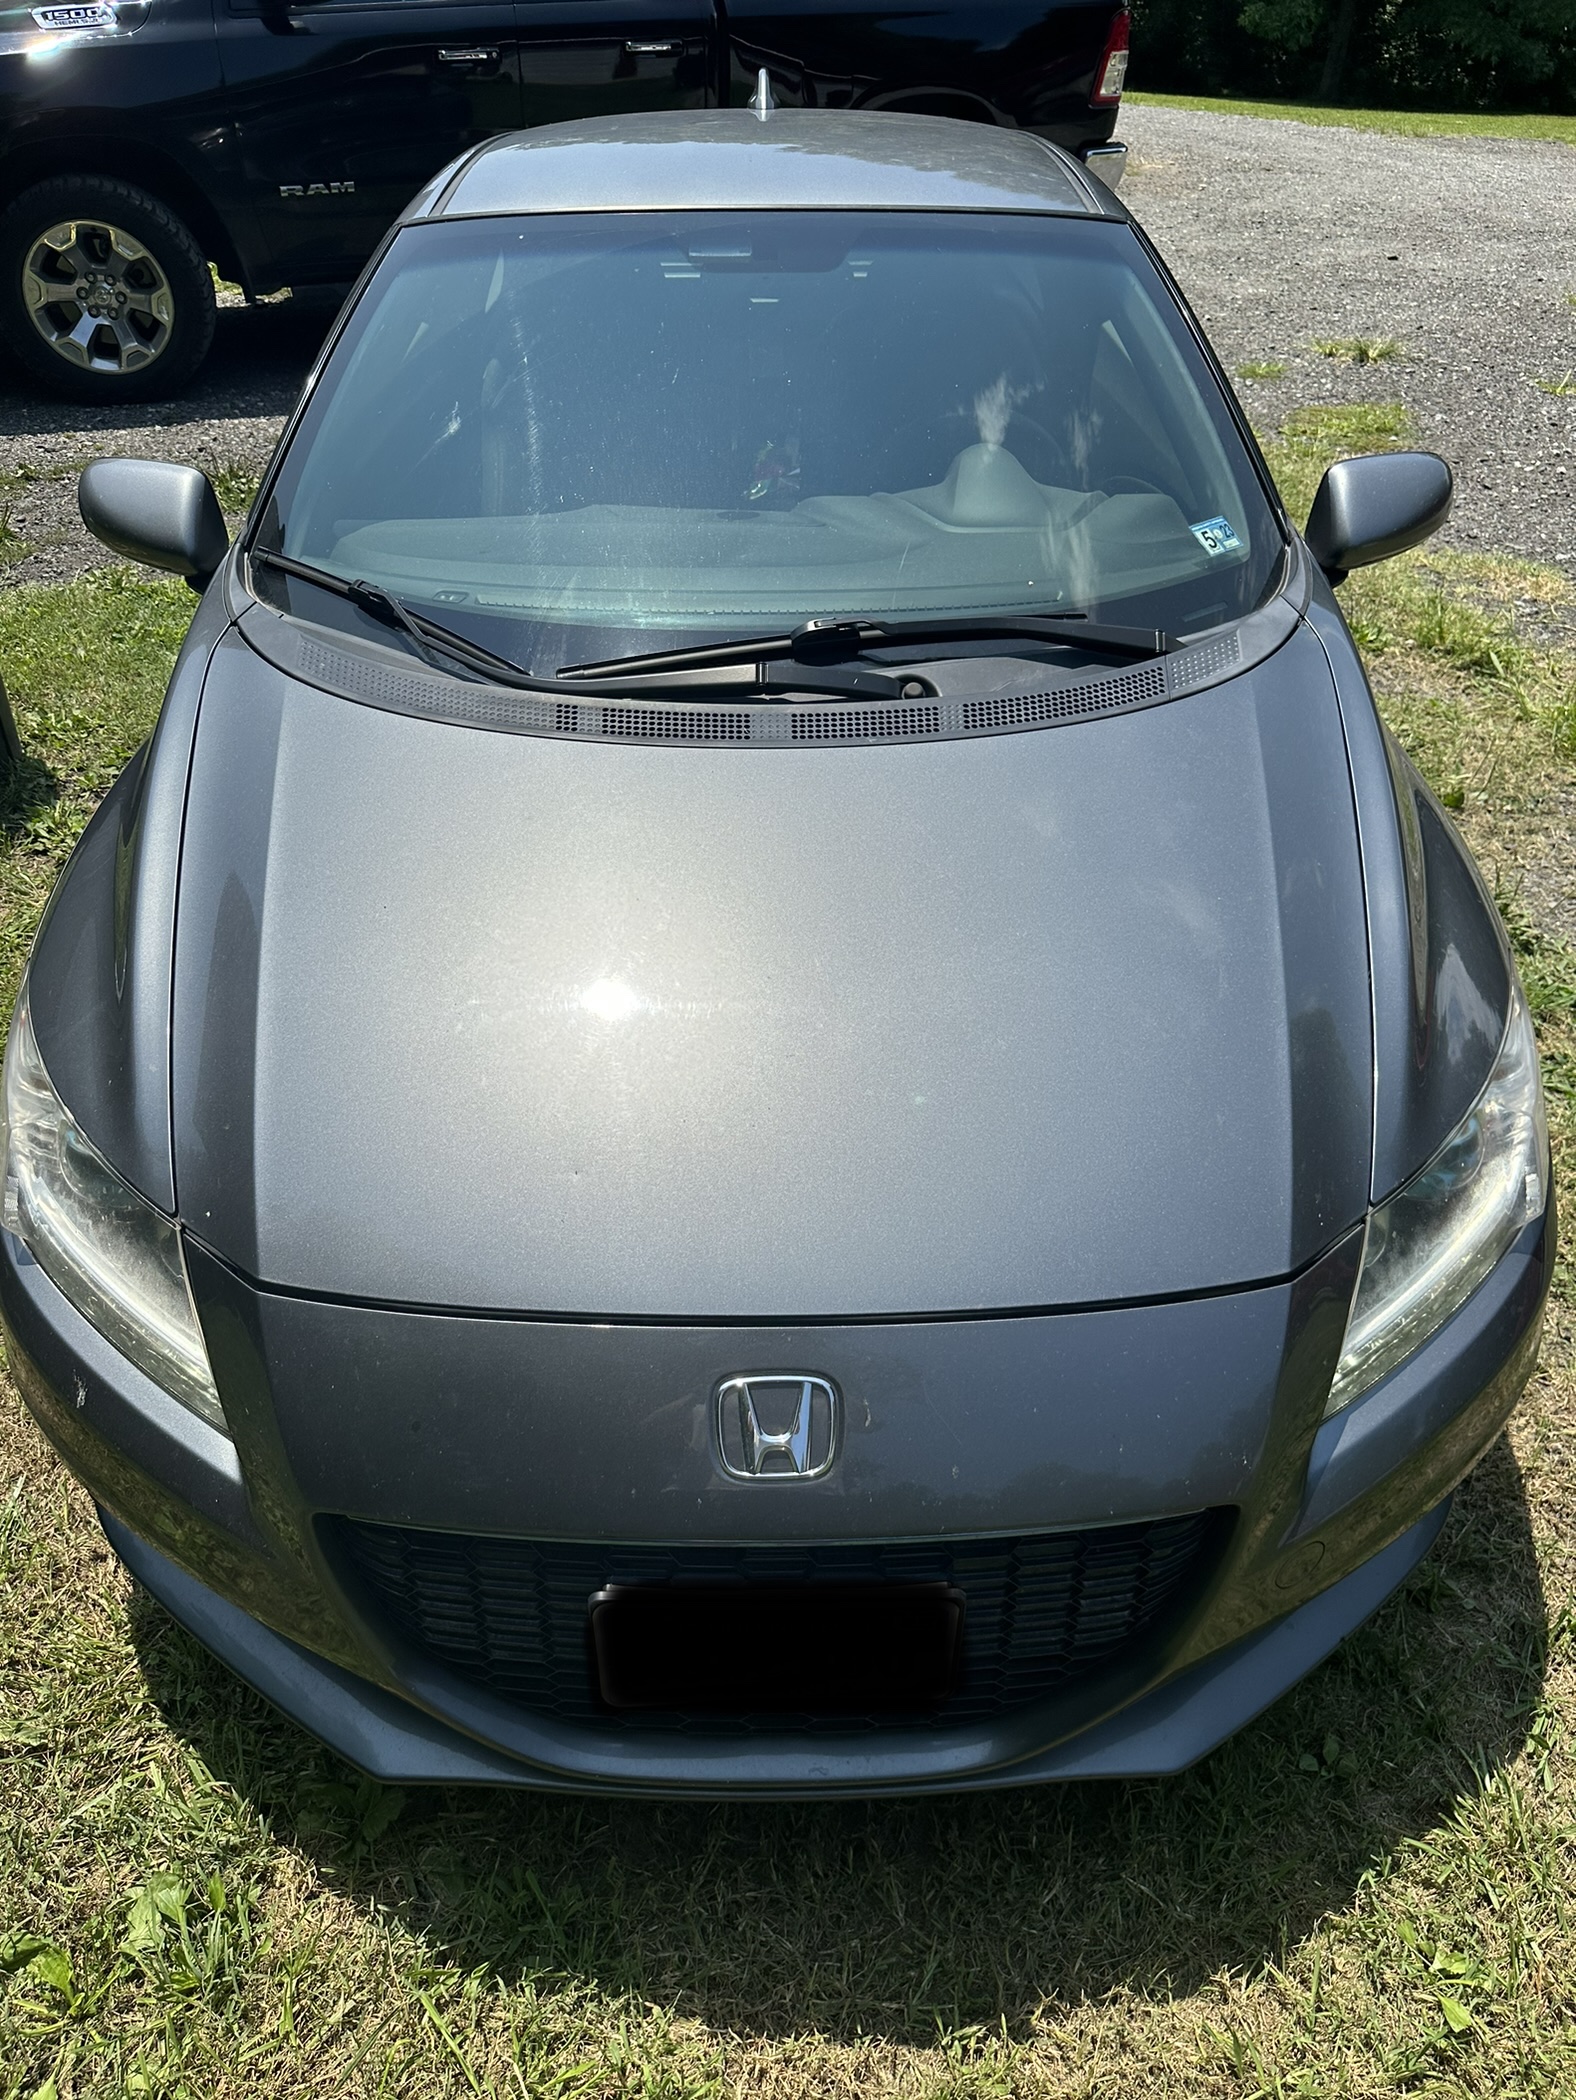 Used Honda CR-Z for Sale Right Now - Autotrader